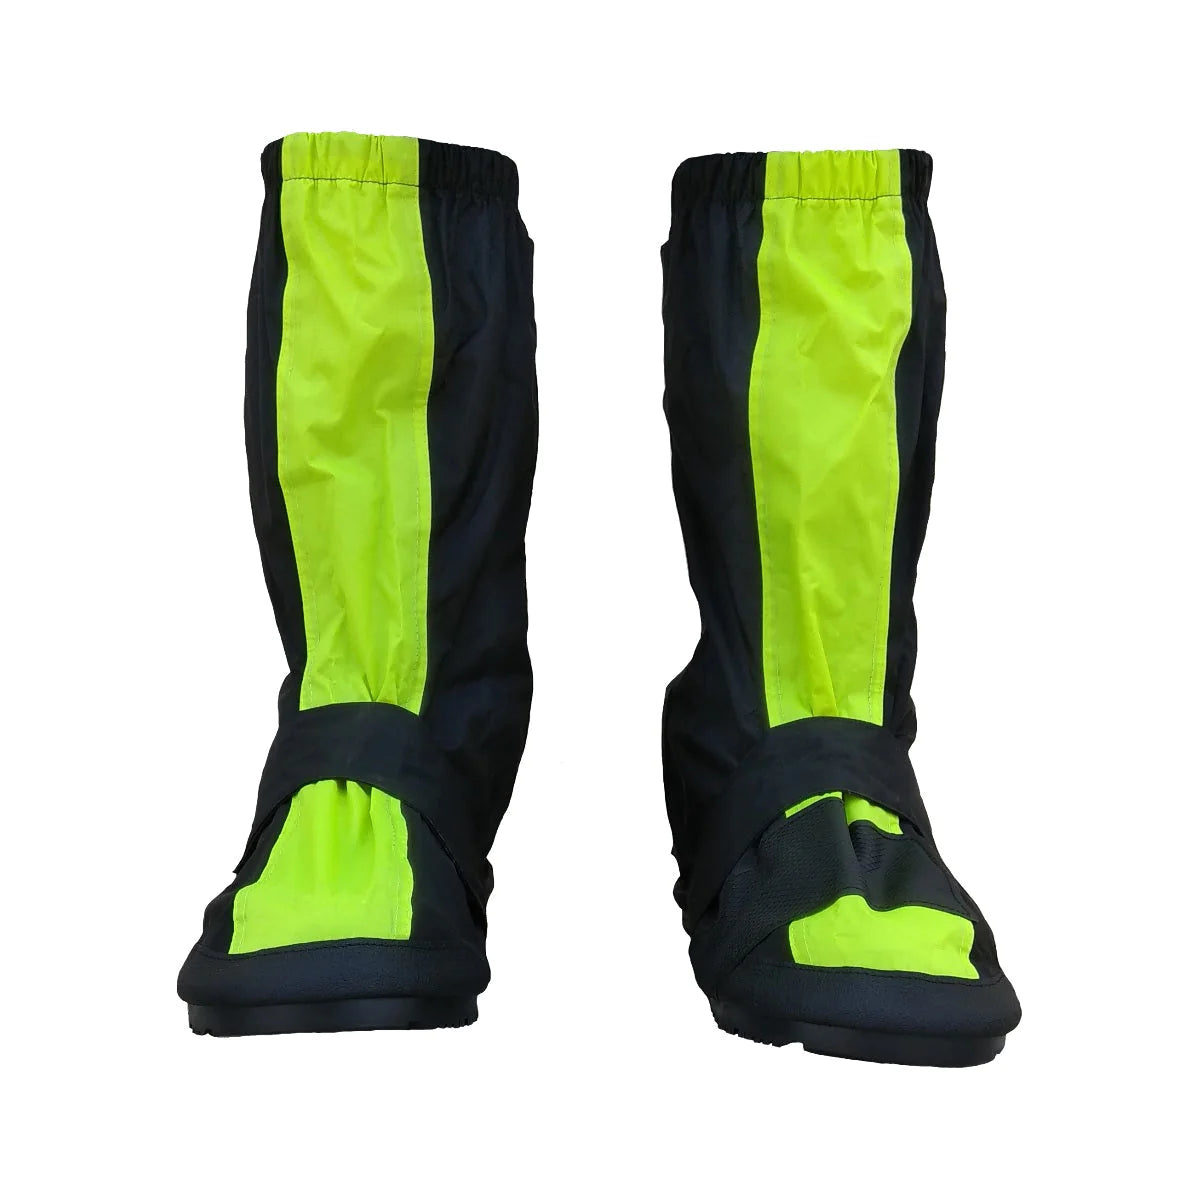 Trooper Boot Covers - Overboots - Fluo Green